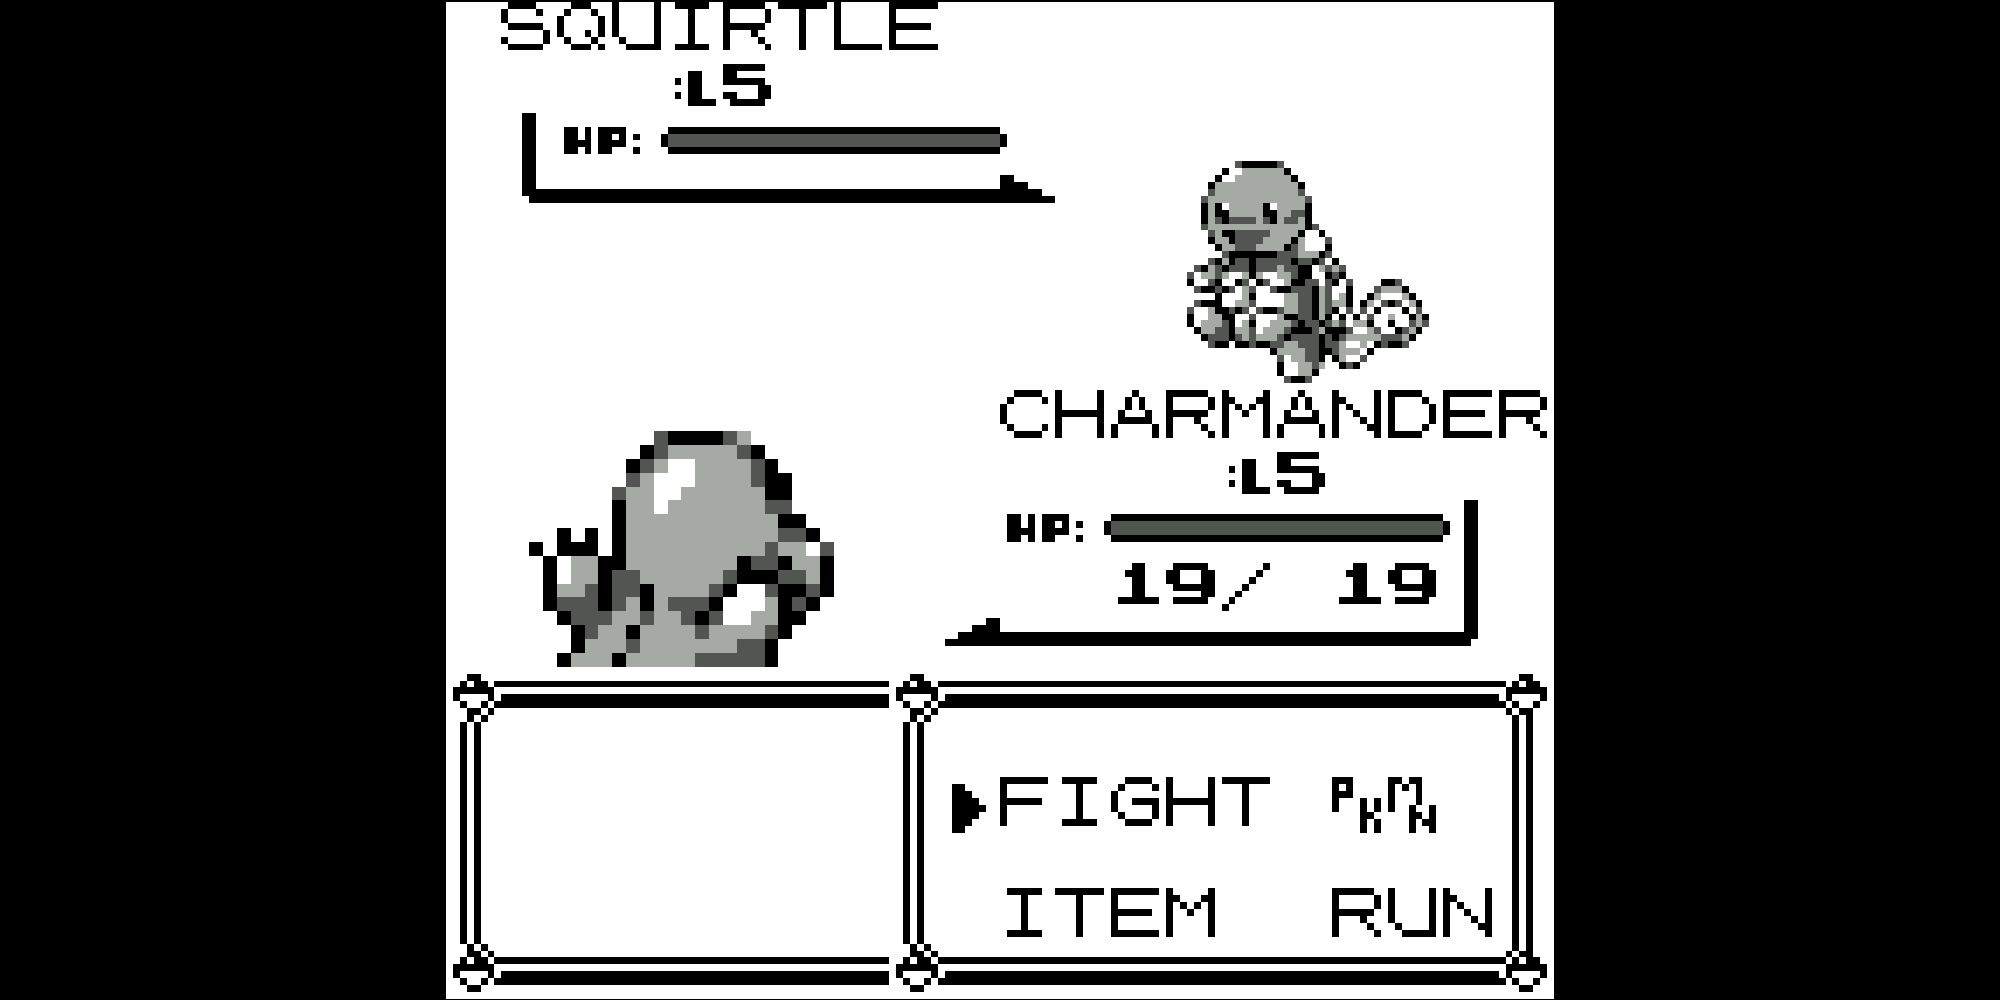 Charmander battling Squirtle in Pokemon Red and Pokemon Blue